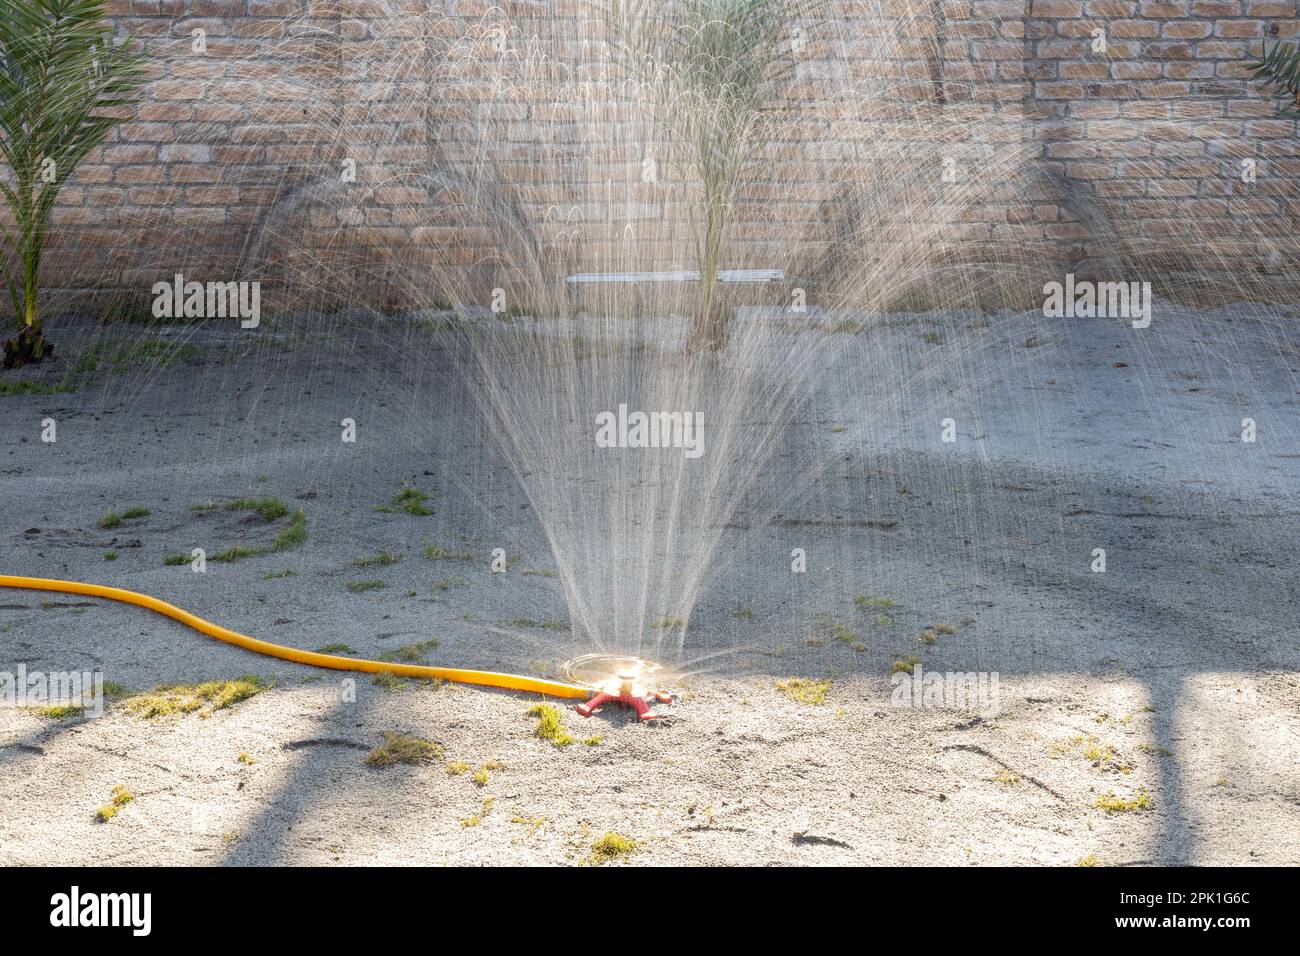 Garden lawn irrigation sprinkler system watering the grass. Selective focus. Stock Photo